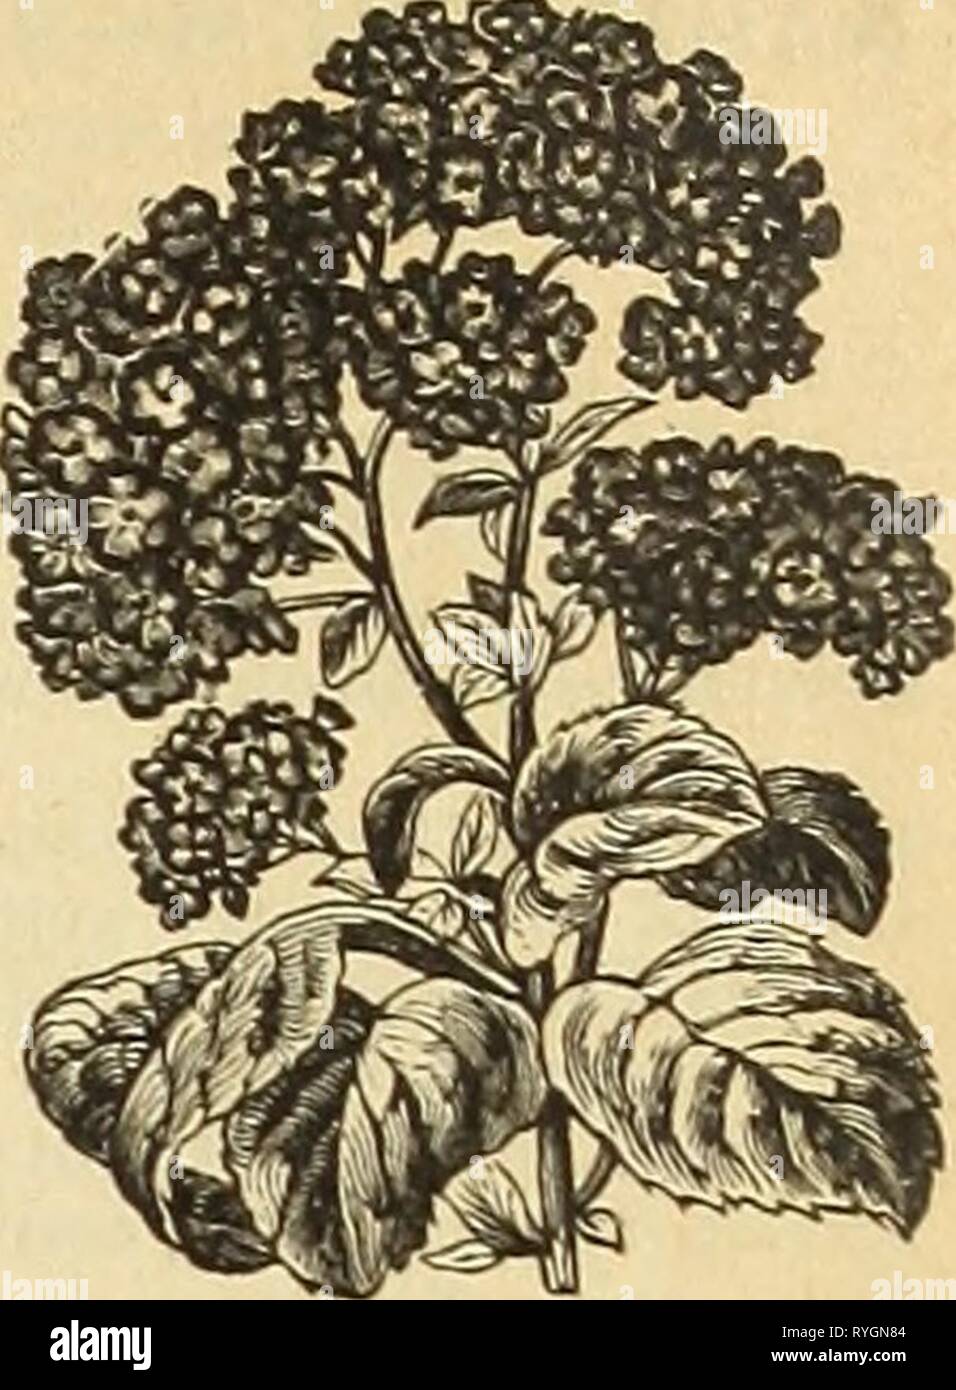 E. H. Hunt's catalogue  ehhuntscatalogu1895ehhu 0 Year: 1895    GLOXINIA. Trade Pkt. Oz. Glaucium Luteum.  Geranium, apple scented 1,000 seeds, S2.00; 100 Zonale, single, mixed- Gilla, mixed.  .. Defiance, new, Godetia, finest mixed - Lady Albemarle   10 Lady Satin Rose Gomphrena Globosa, white, red, golden or mixed Gypsophila Paniculata, white, fine for bouquets Elegans, white, ' ' Helianthus (Sunflower) Cucumerifolius or Miniature Argophyllus, leaves are clothed with a silvery down Nanus Folis Variegatis, green and yellow foliage. Helichrysum Alonstrosum, Dr. Livingstone, dark  Snowball, whi Stock Photo